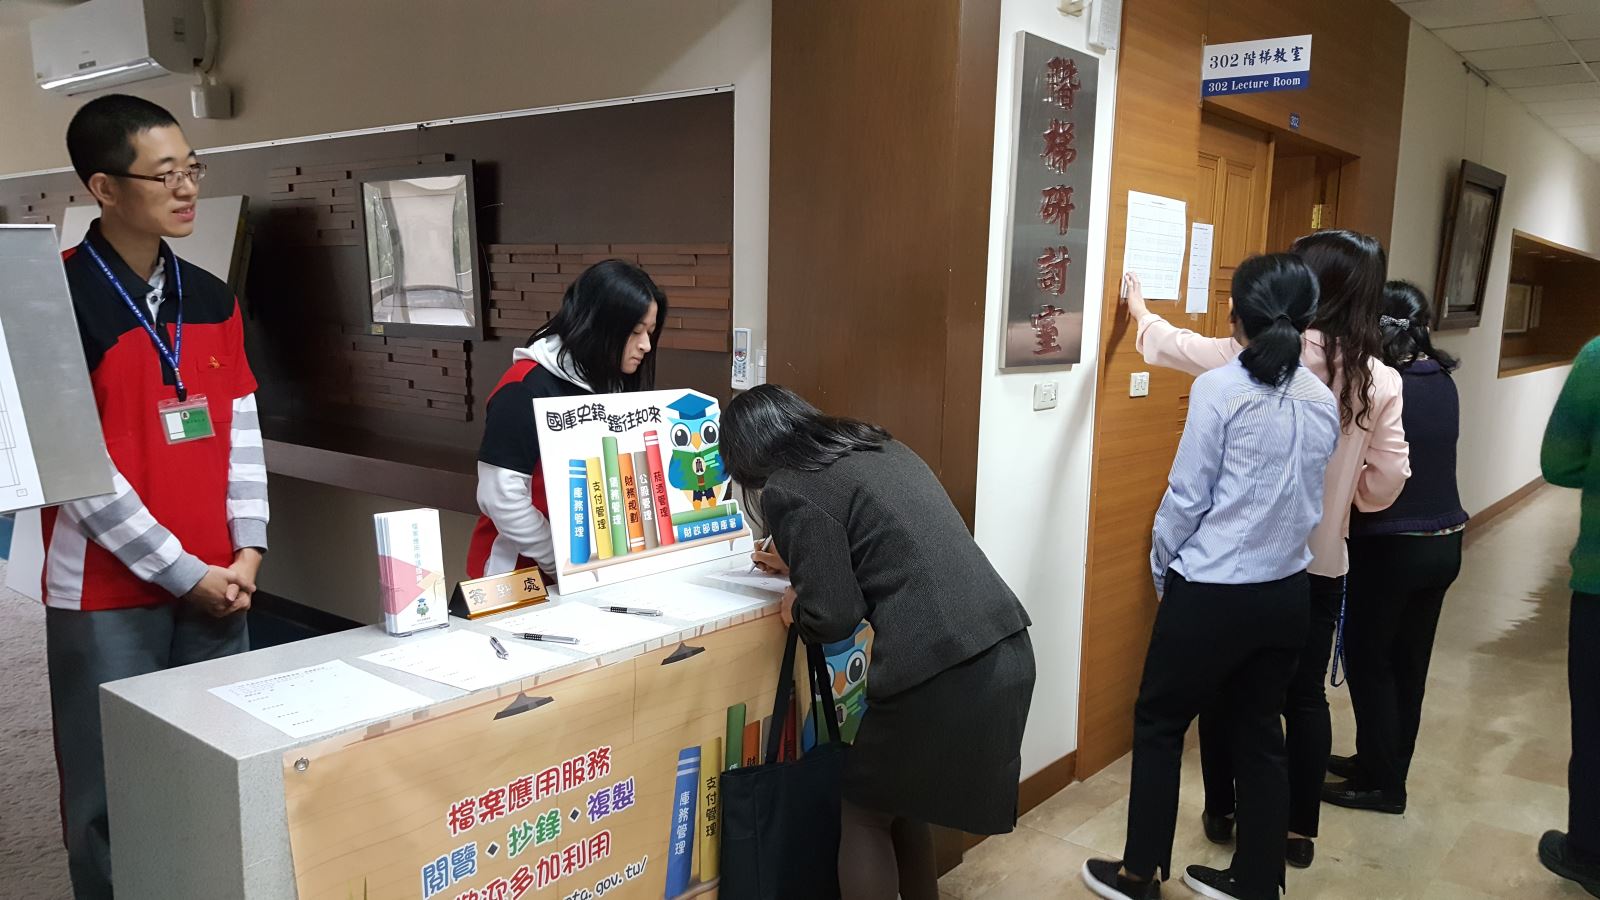 Picture: The on-site booth was equipped with slogan placards, leaflets, guide to archive access application and activity related subjects.